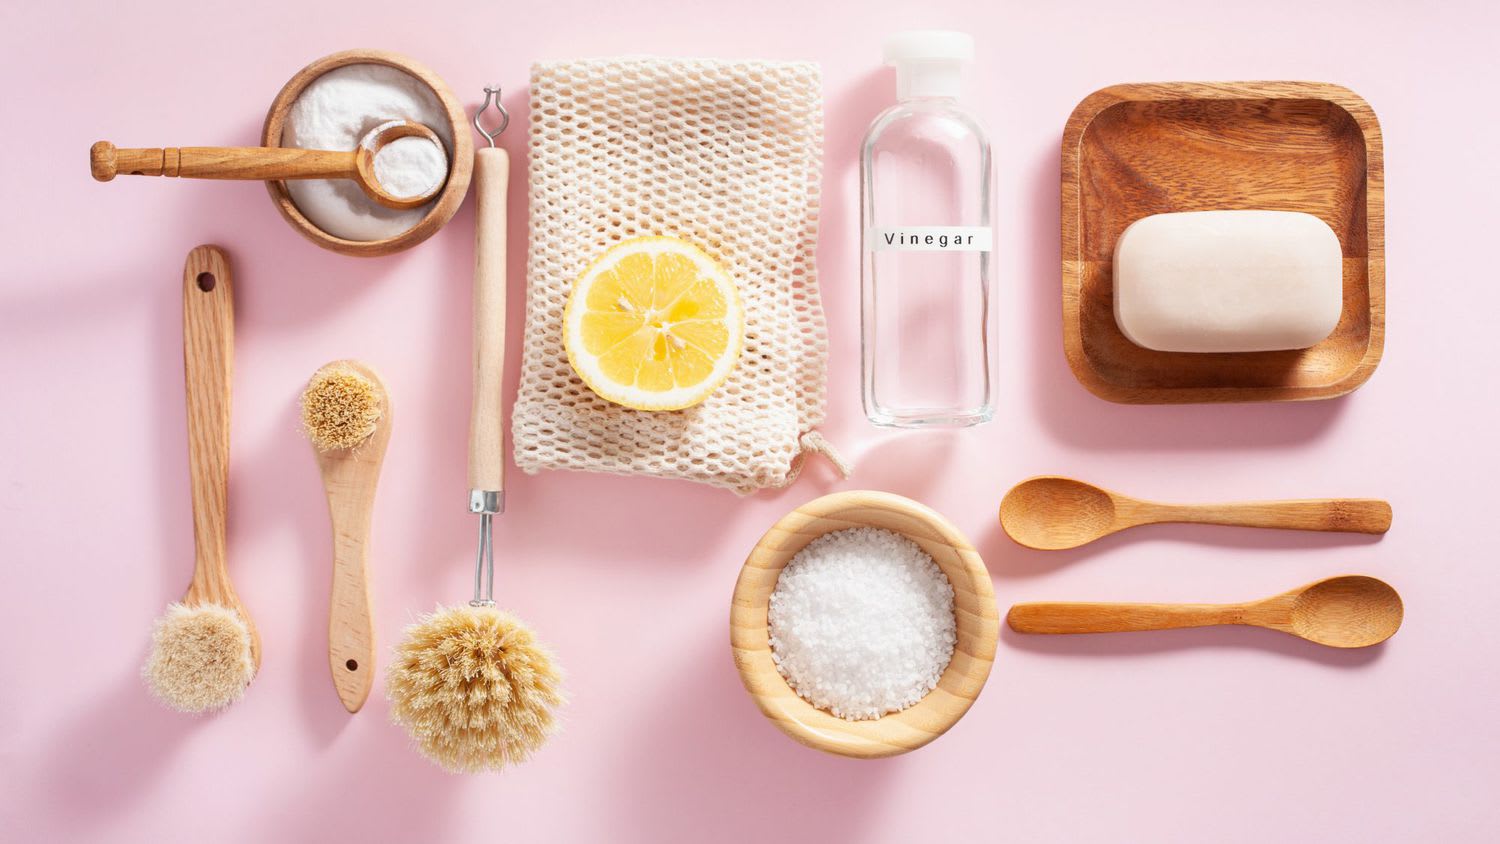 10 All-Natural, Homemade Cleaning Solutions to Scrub Every Inch of Your Home